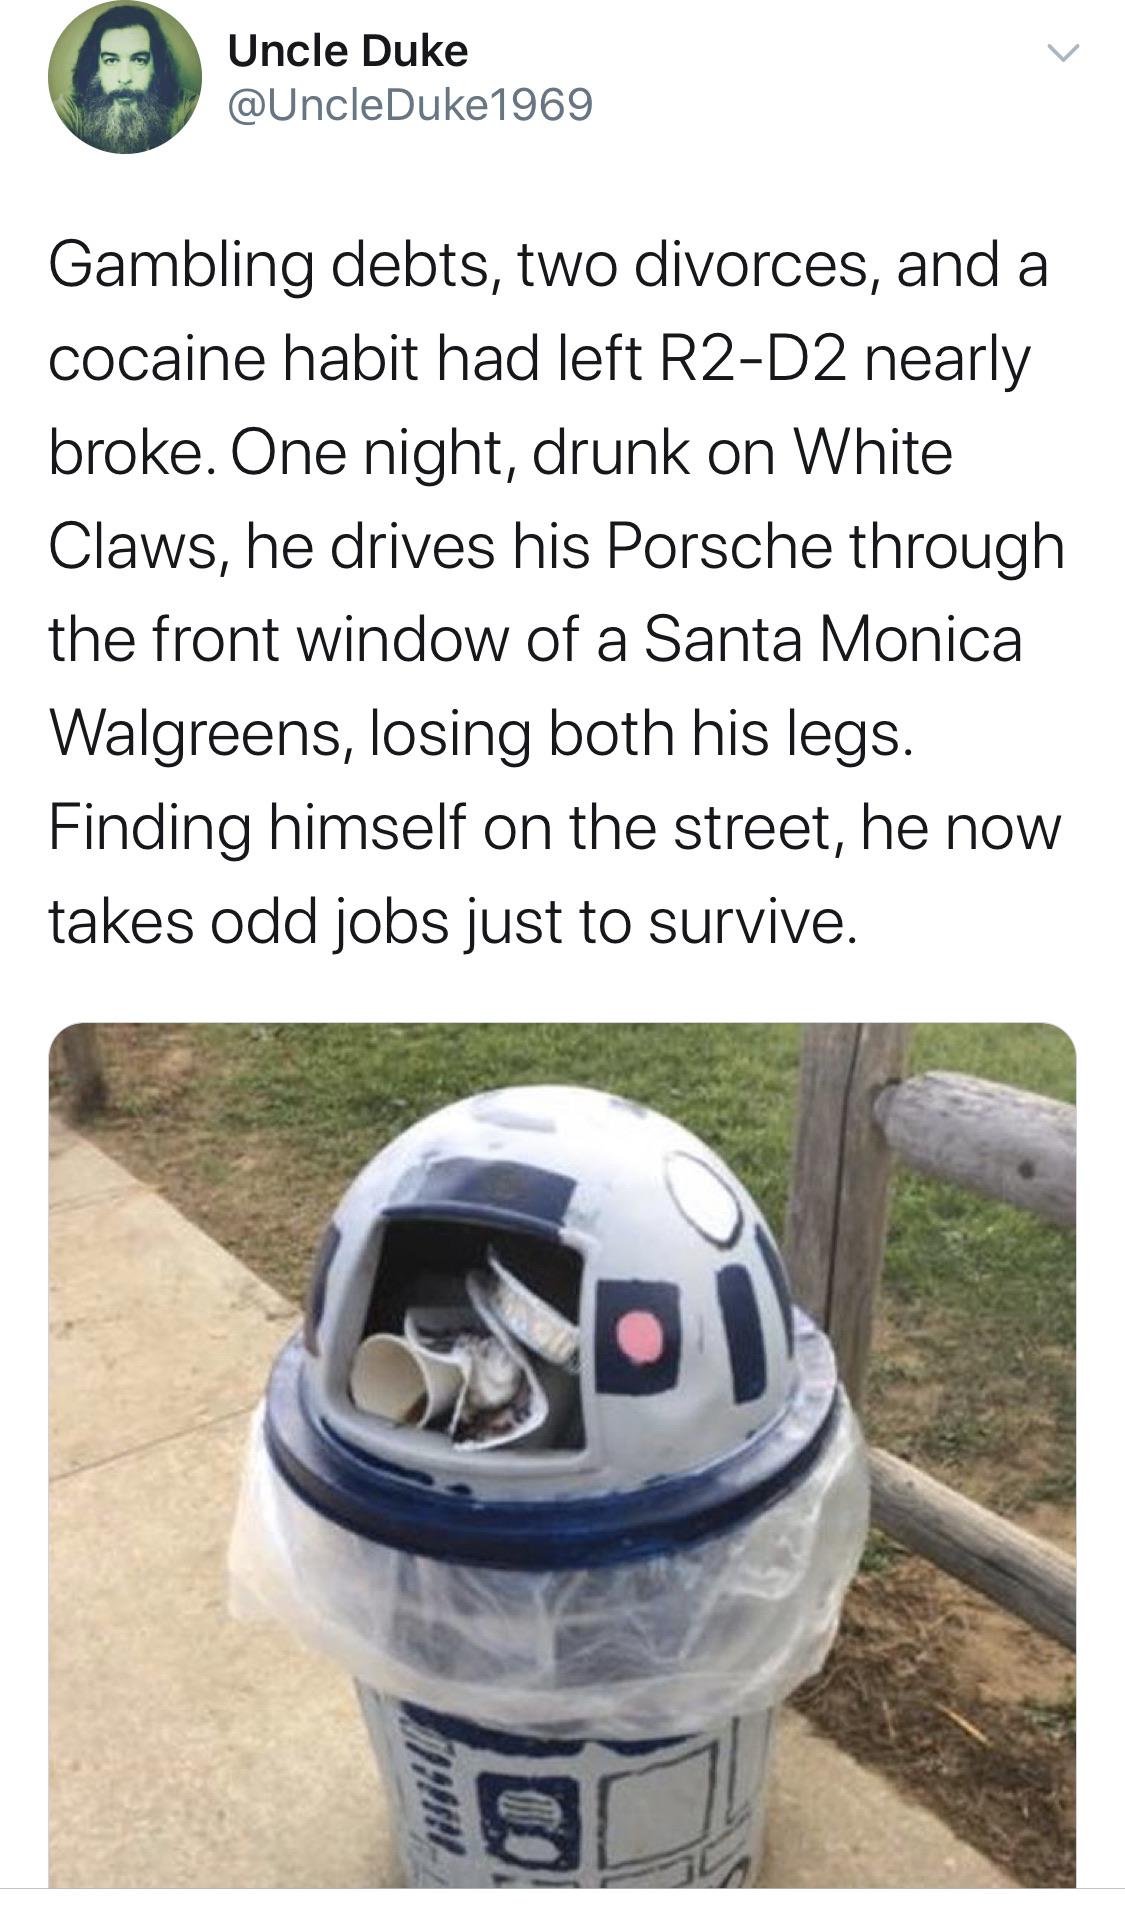 vehicle - Uncle Duke Gambling debts, two divorces, and a cocaine habit had left R2D2 nearly broke. One night, drunk on White Claws, he drives his Porsche through the front window of a Santa Monica Walgreens, losing both his legs. Finding himself on the st